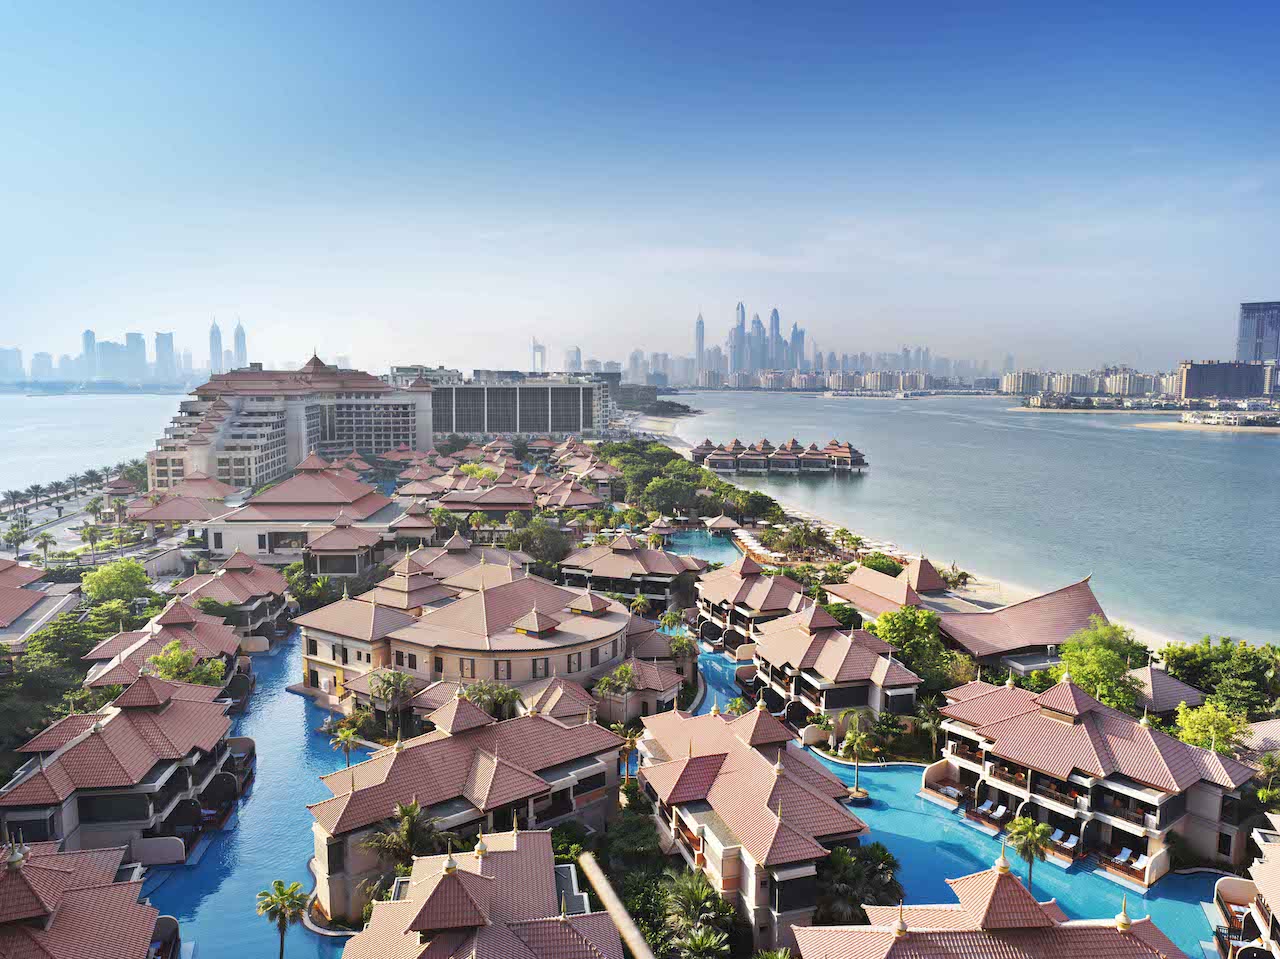 Anantara The Palm Dubai is a luxurious seaside retreat that’s ideally suited for families and couples alike. We take a closer look.